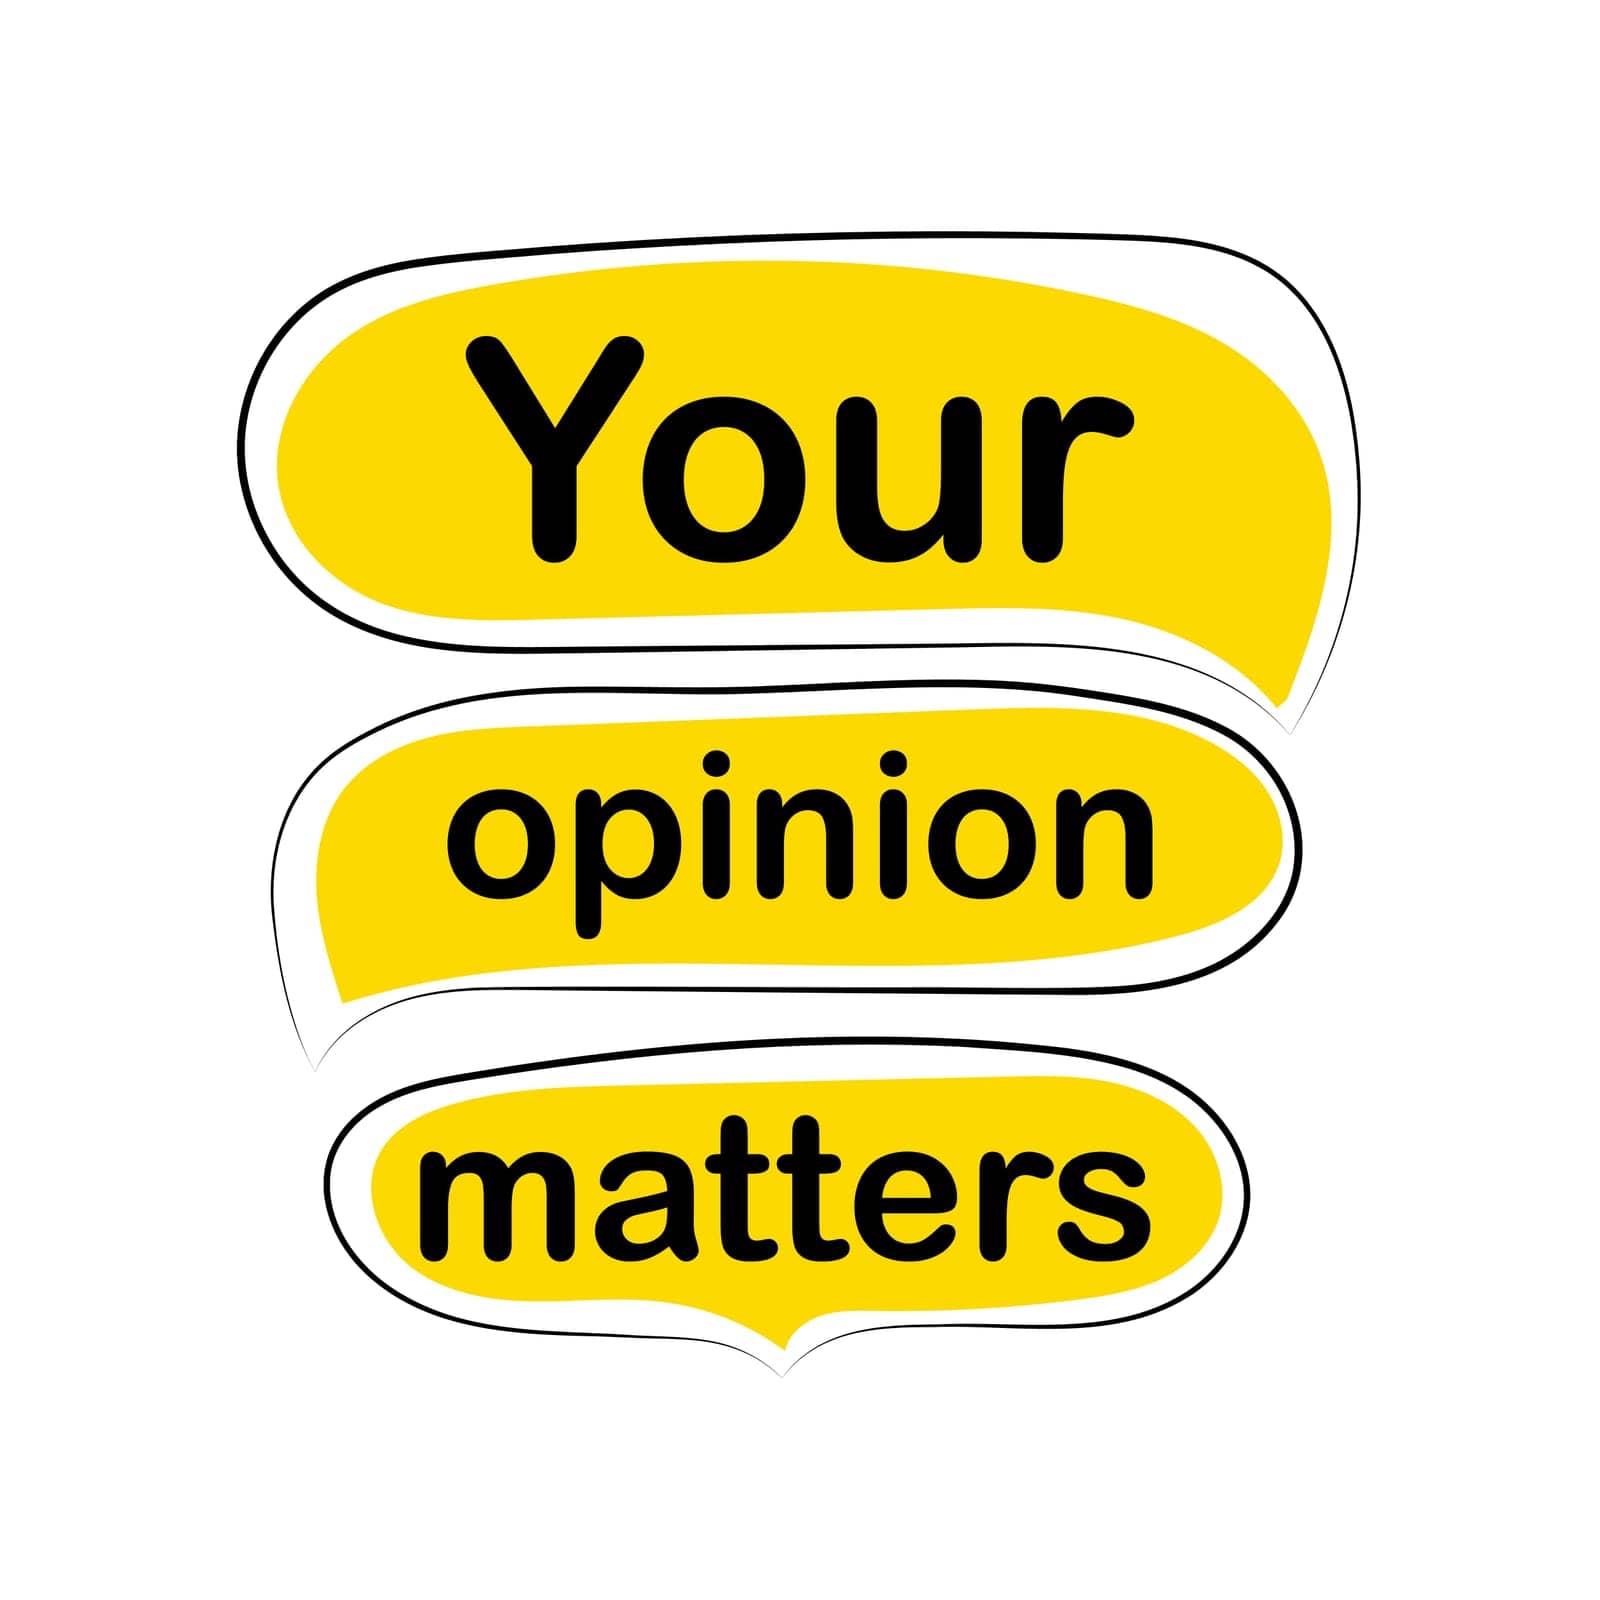 Your opinion matters on speech bubble.